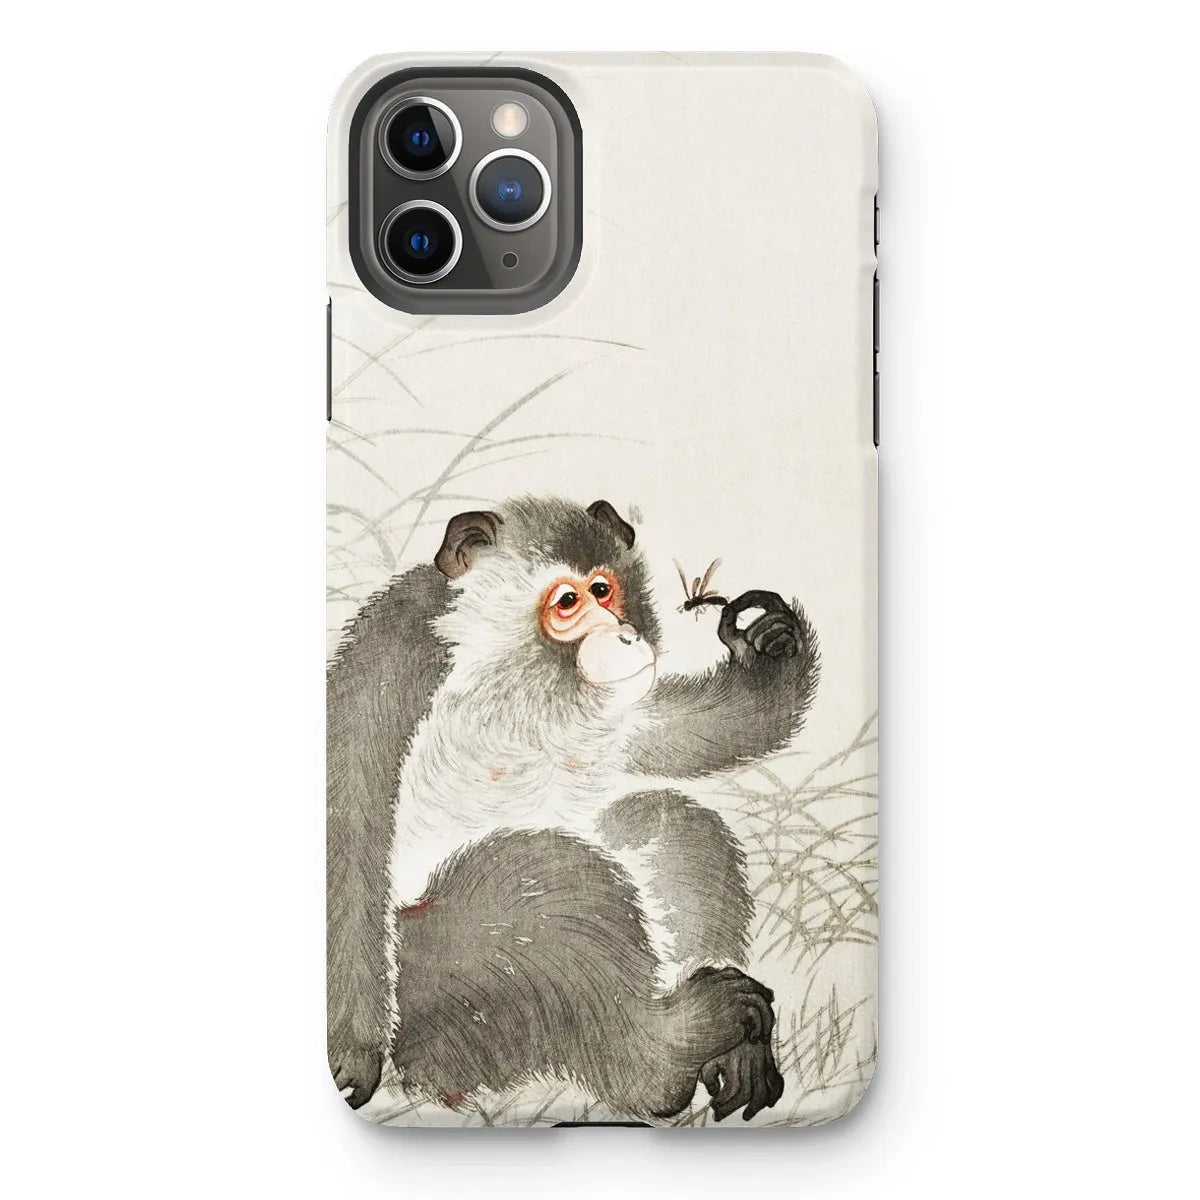 Monkey With Insect - Shin-hanga Art Phone Case - Ohara Koson - Iphone 11 Pro Max / Matte - Mobile Phone Cases